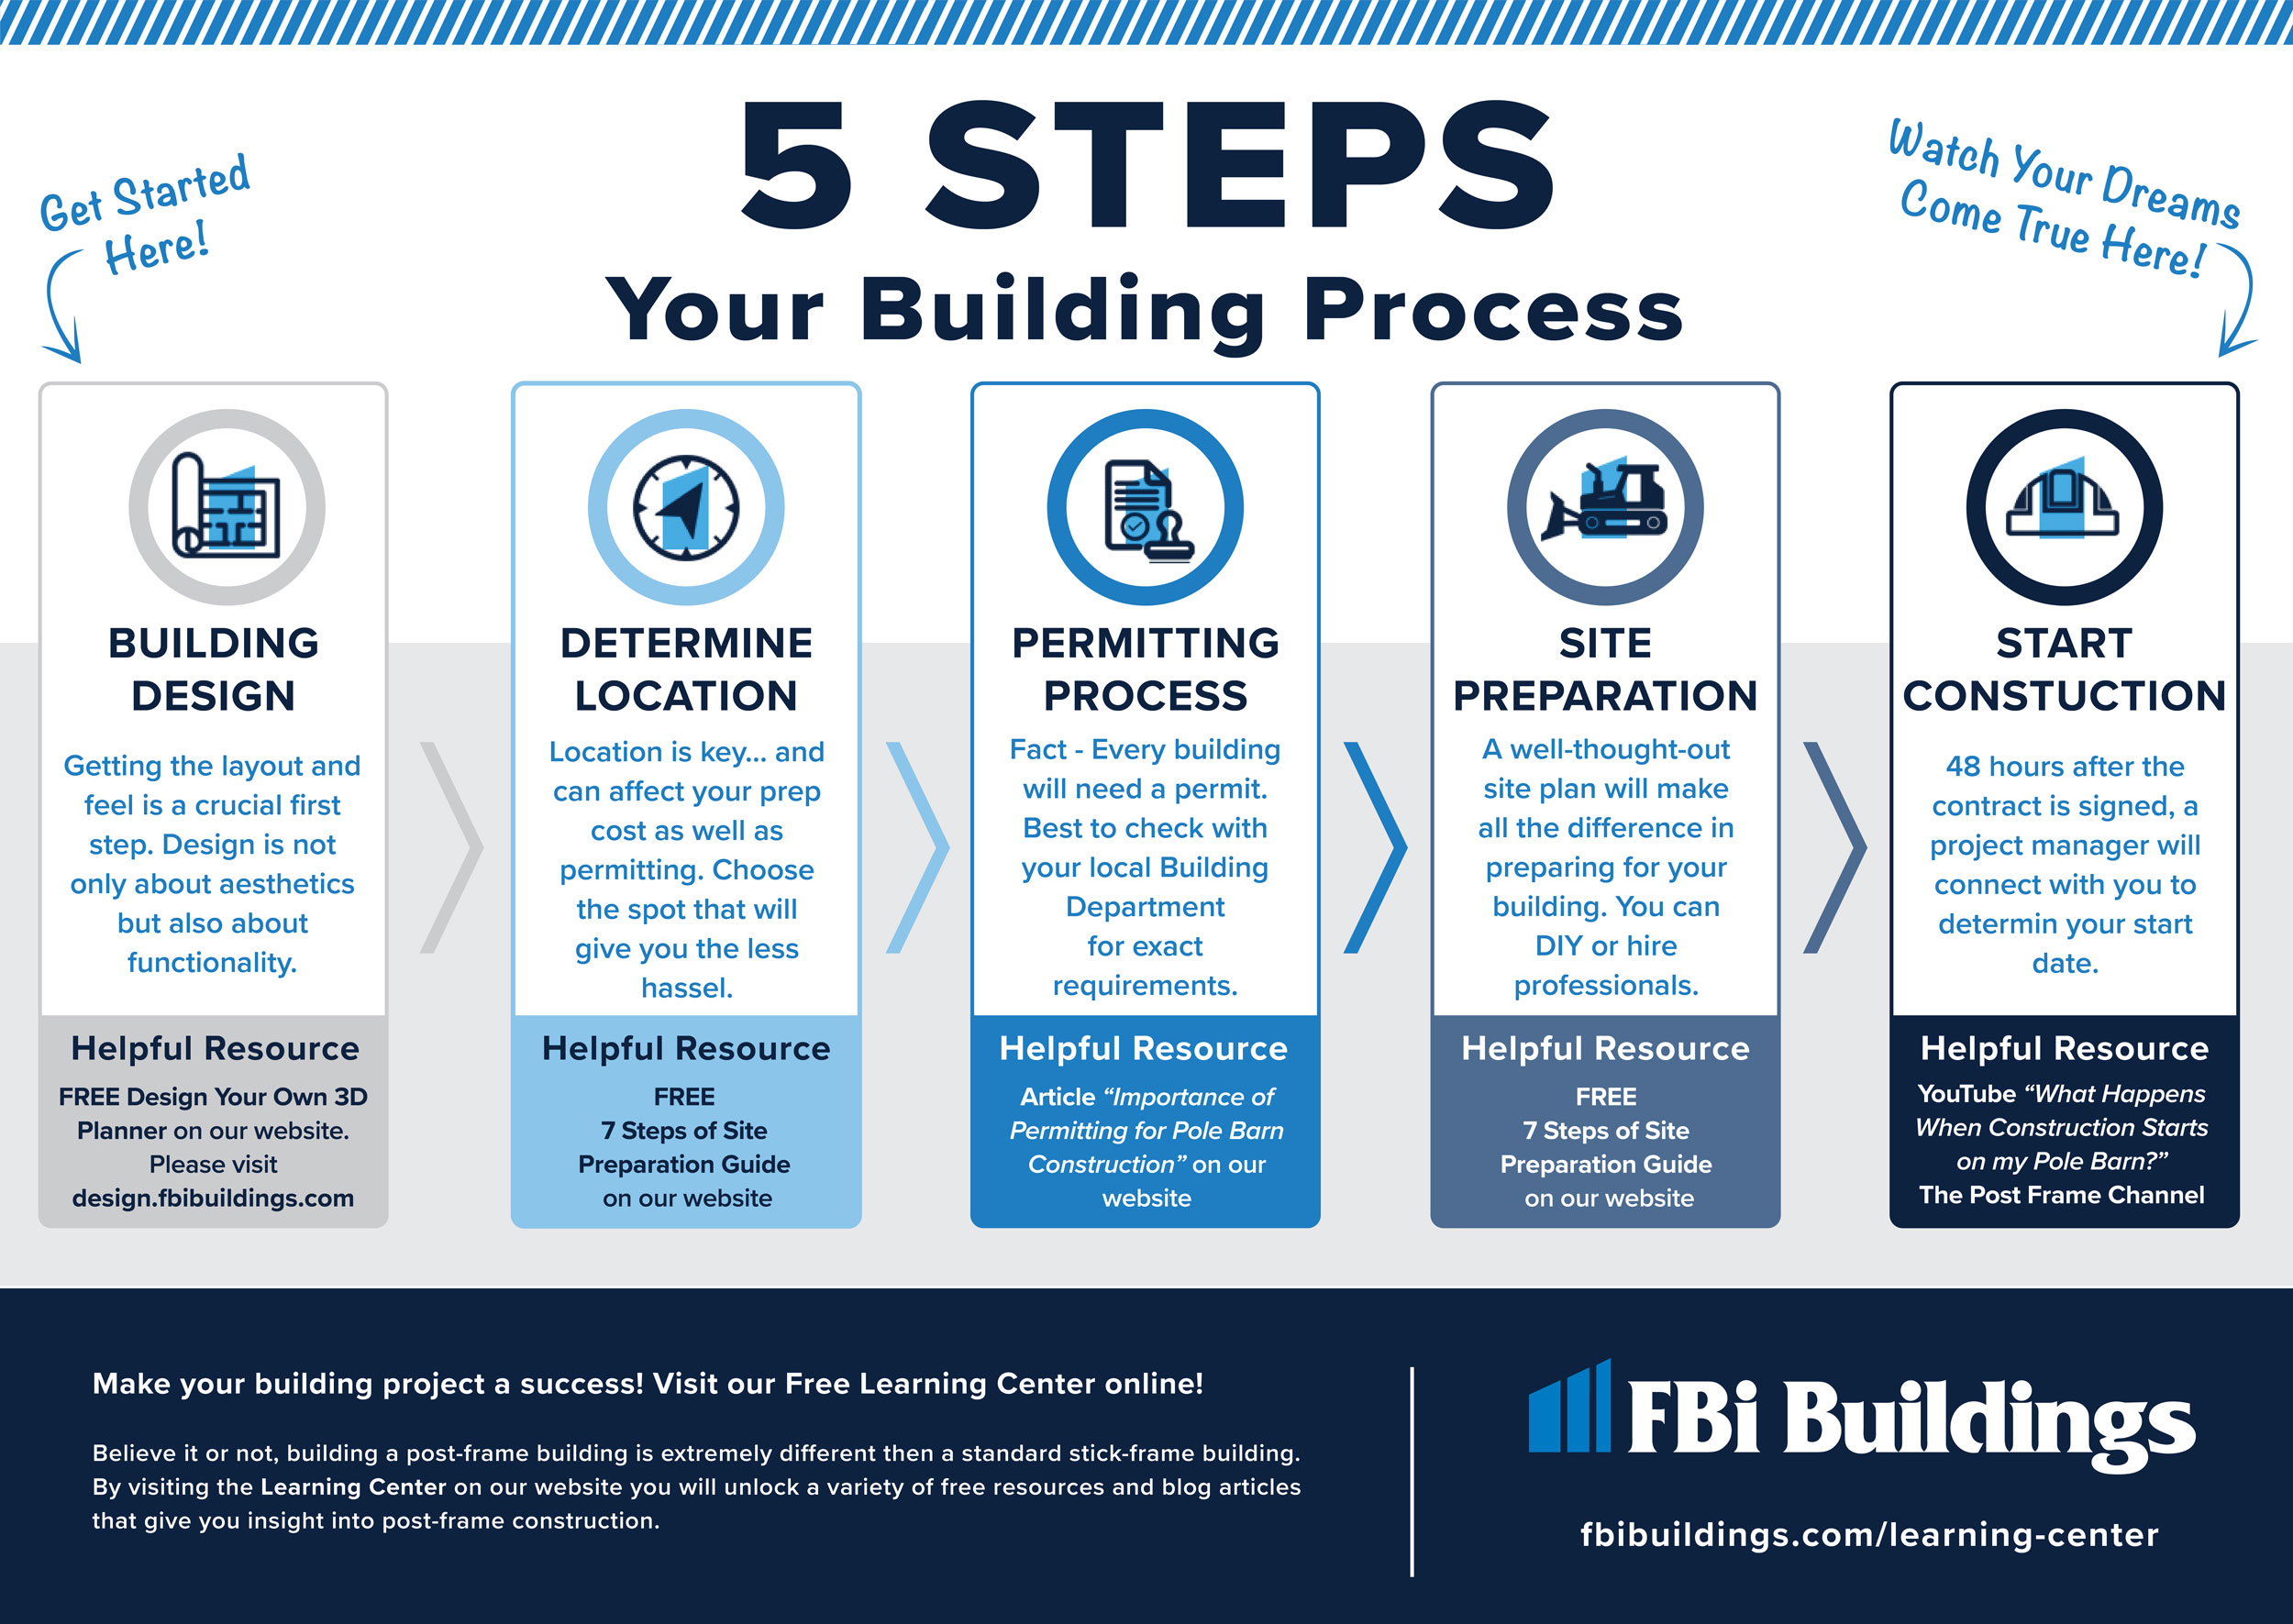 5 Steps of Your Pole Barn Building Process